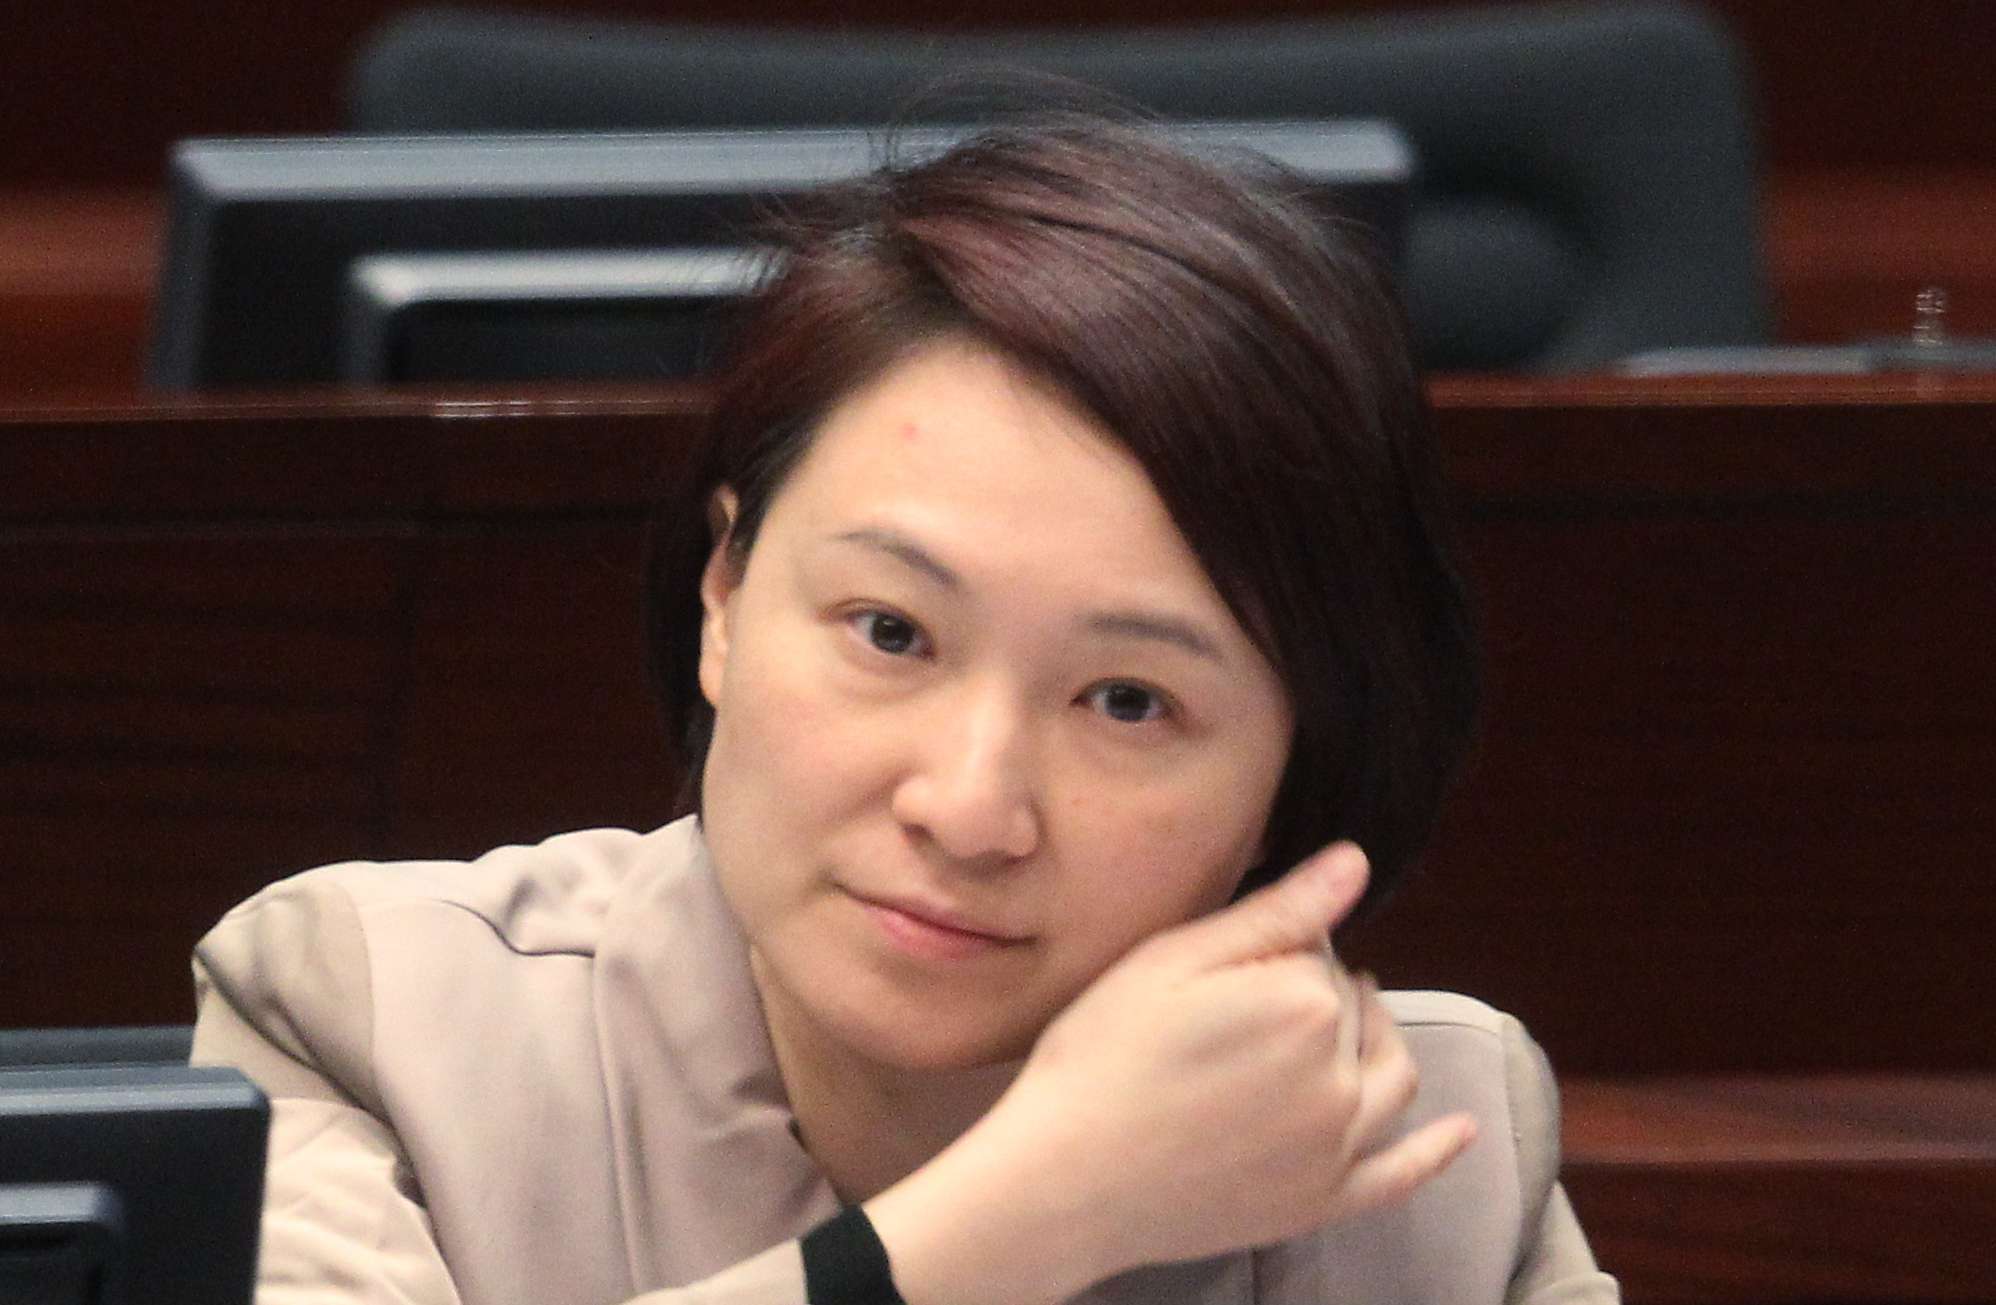 Lawmaker Starry Lee Wai-king from the Democratic Alliance for the Betterment and Progress of Hong Kong met Chief Executive Leung Chun-ying to provide suggestions for the 2017 policy address and budget. Photo: SCMP Pictures